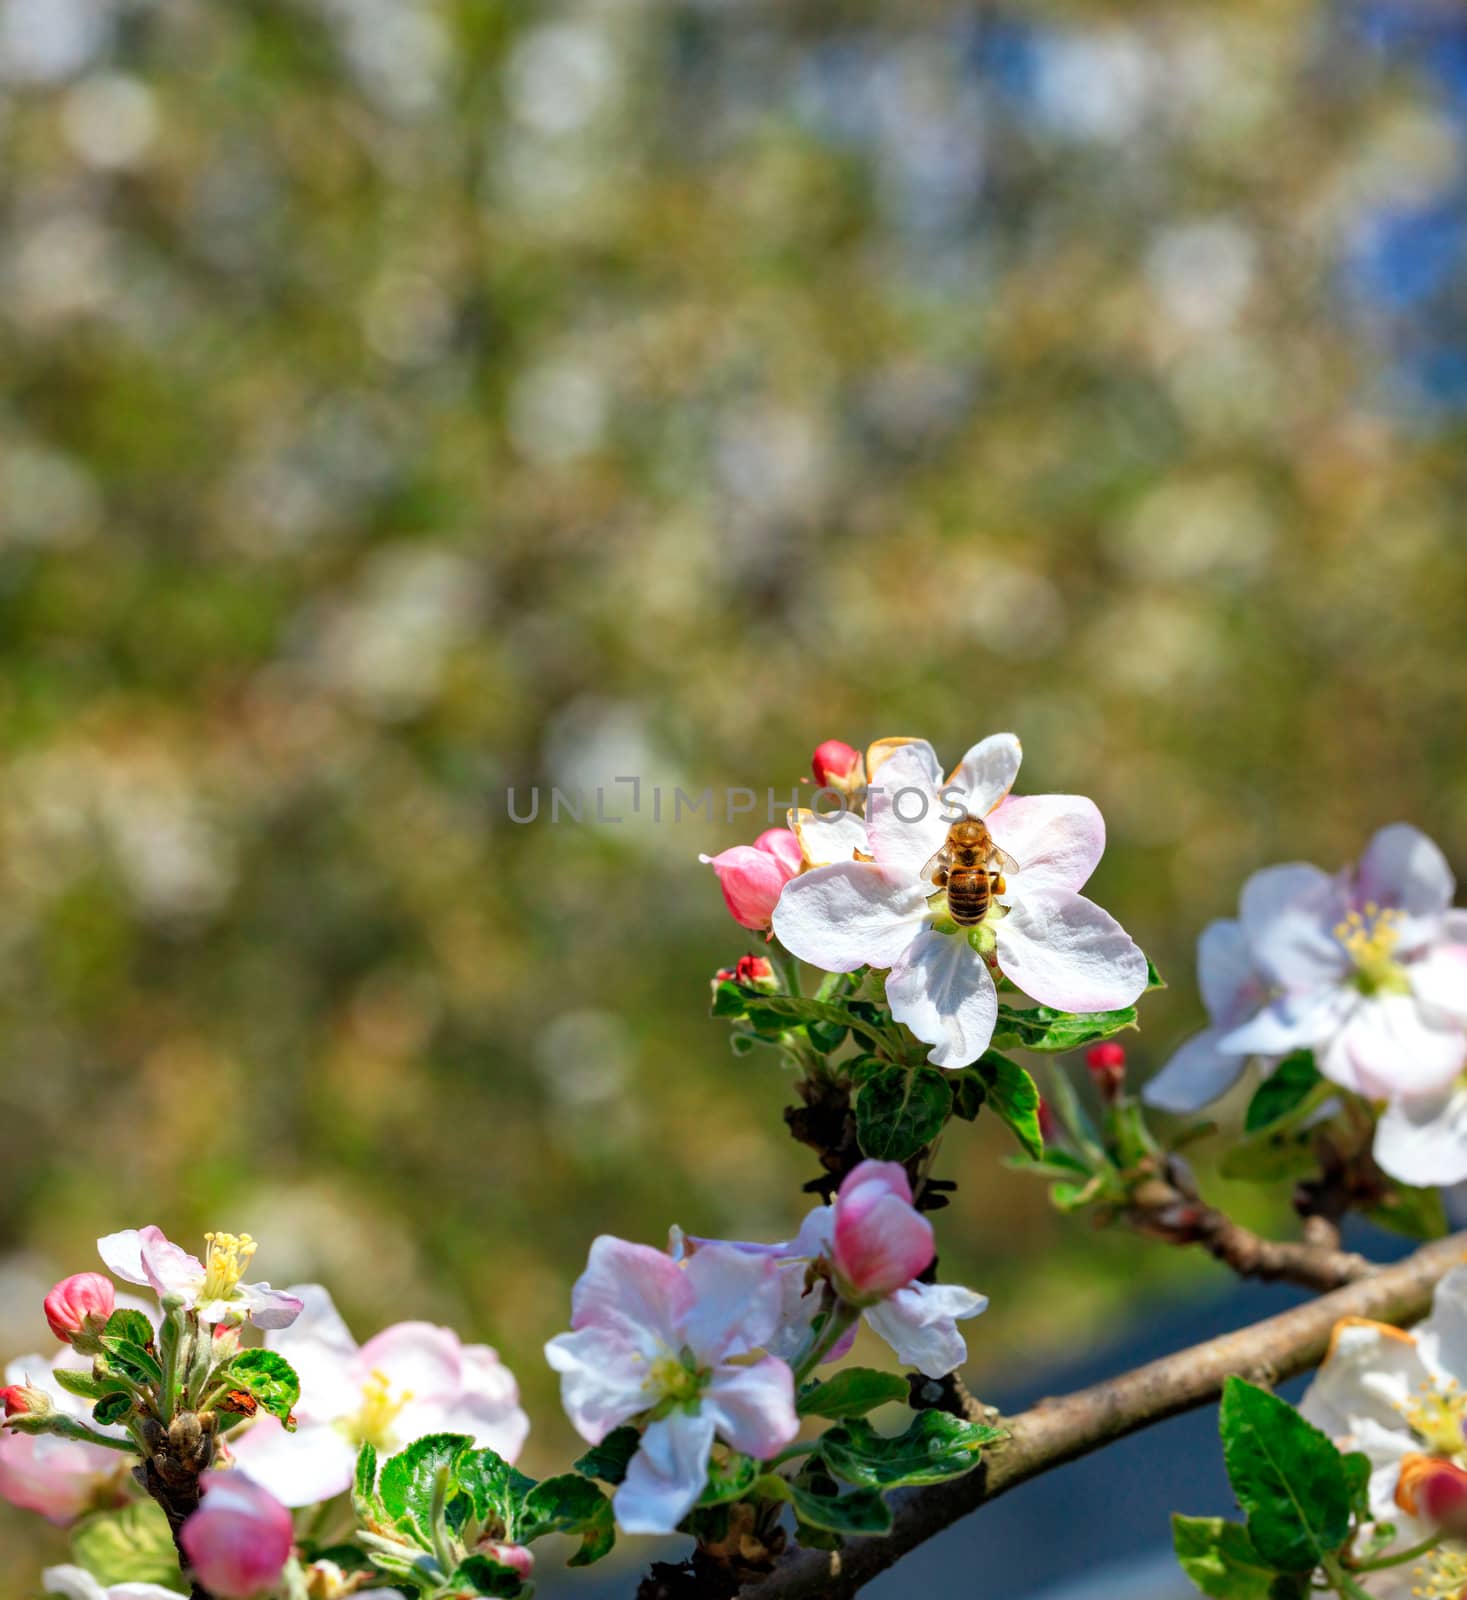 A bee pollinates an apple tree flower collecting nectar and pollen. by Sergii